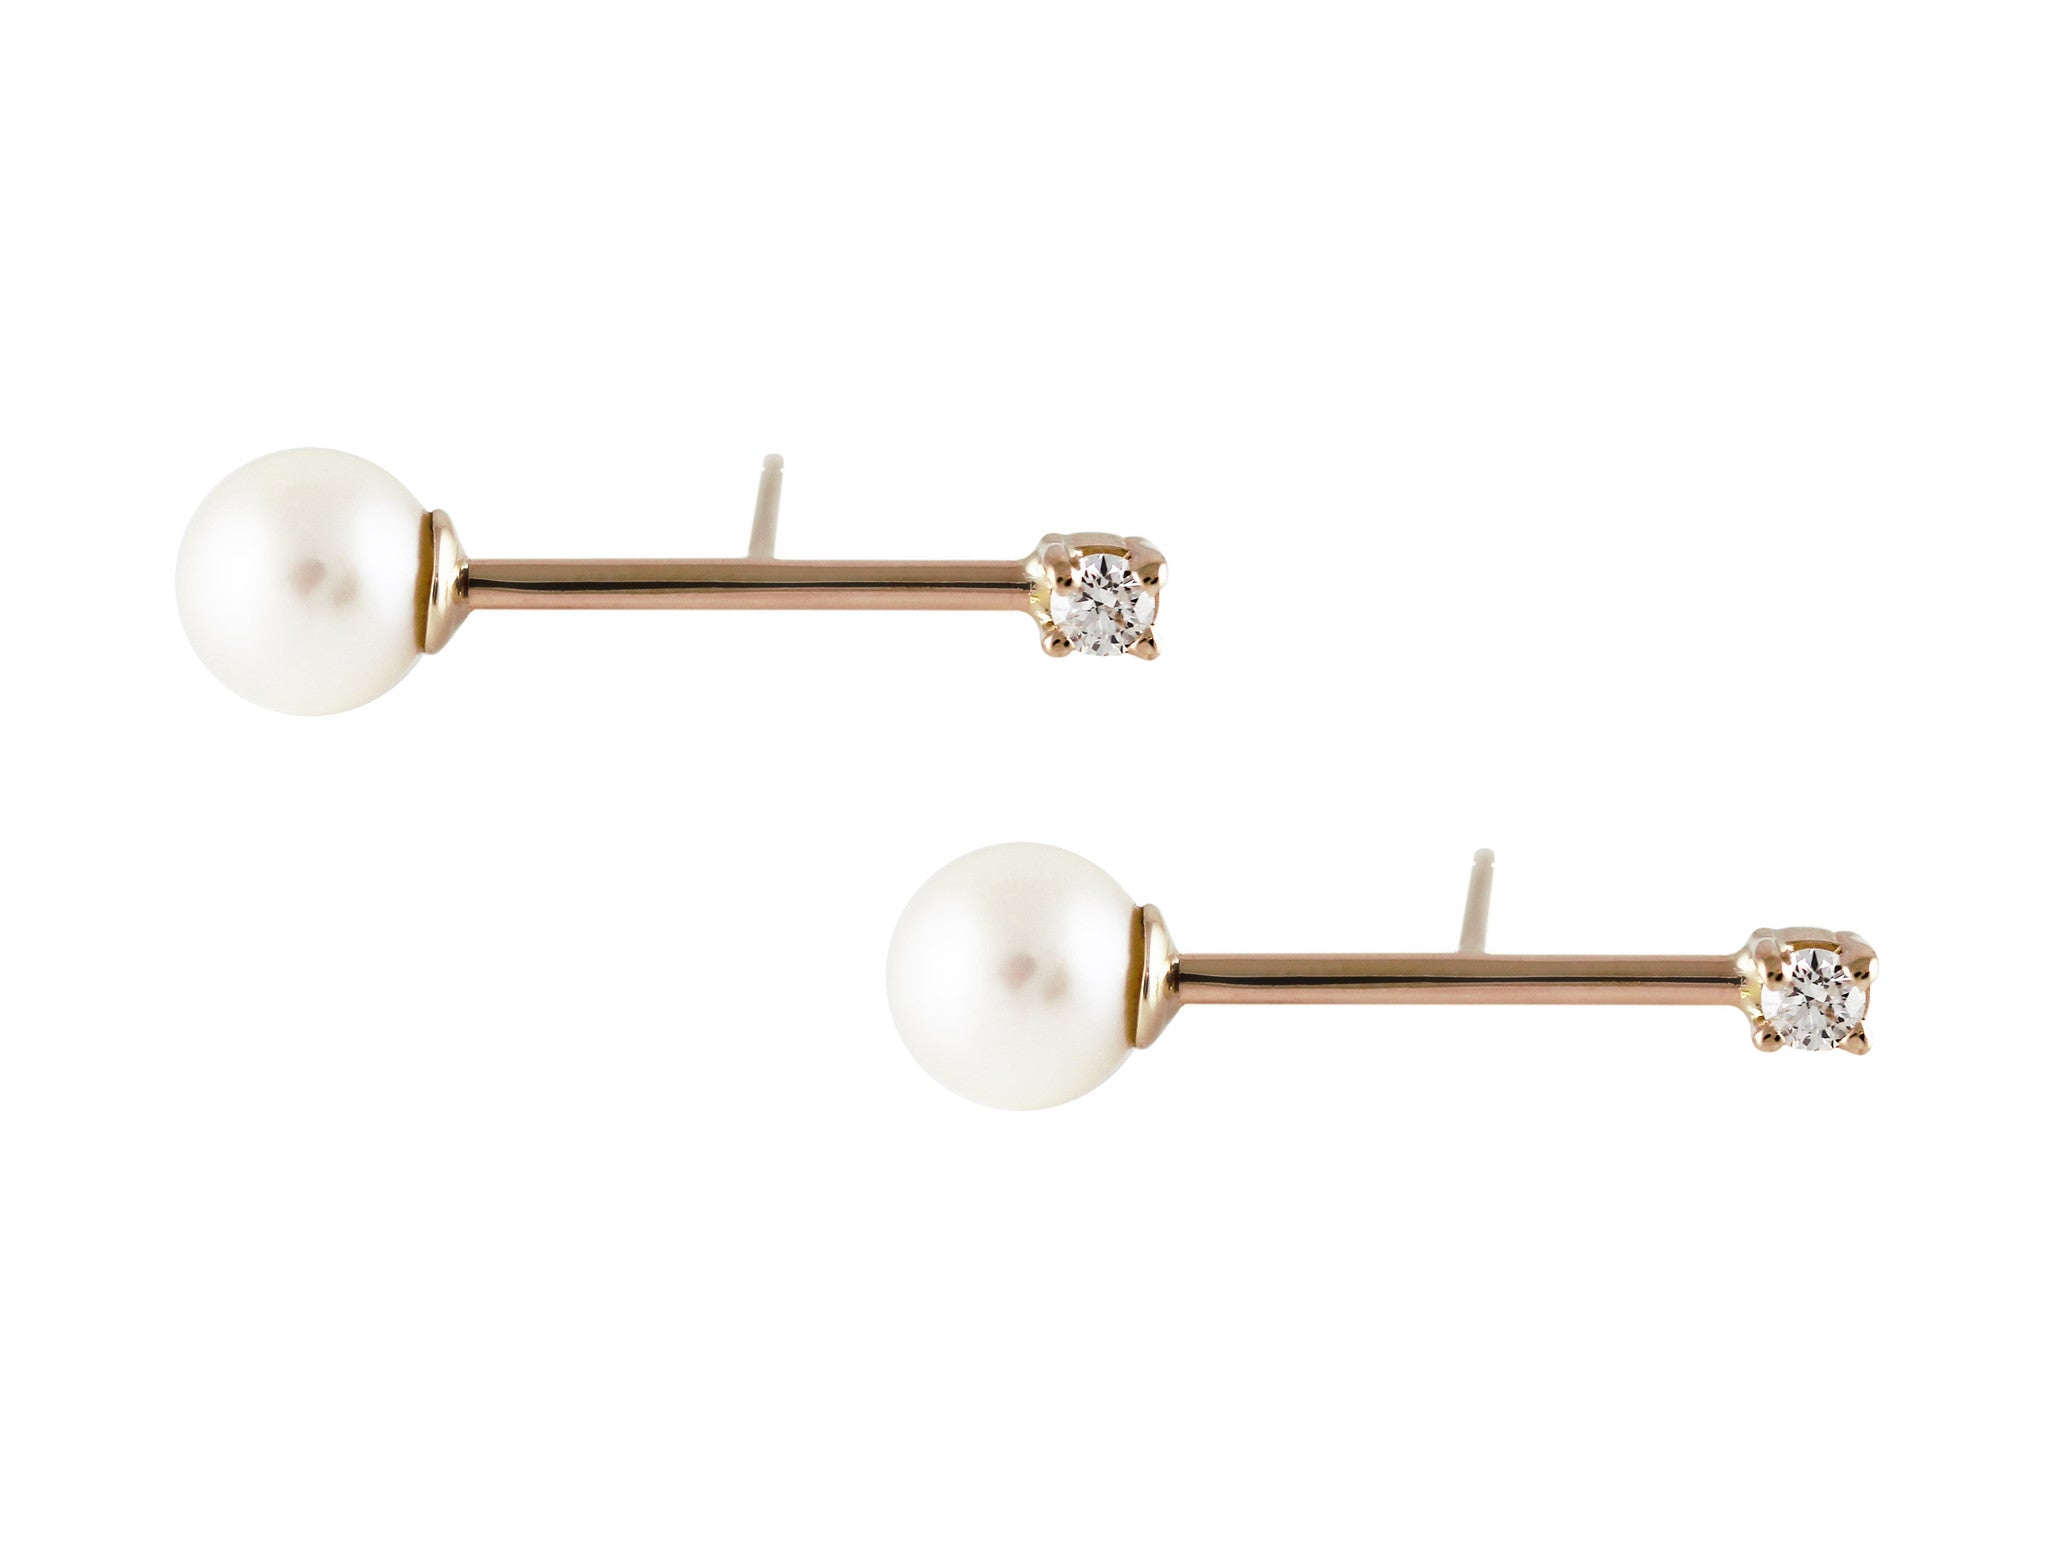 STAPLE WITH PEARL AND DIAMOND ENDS STUDS